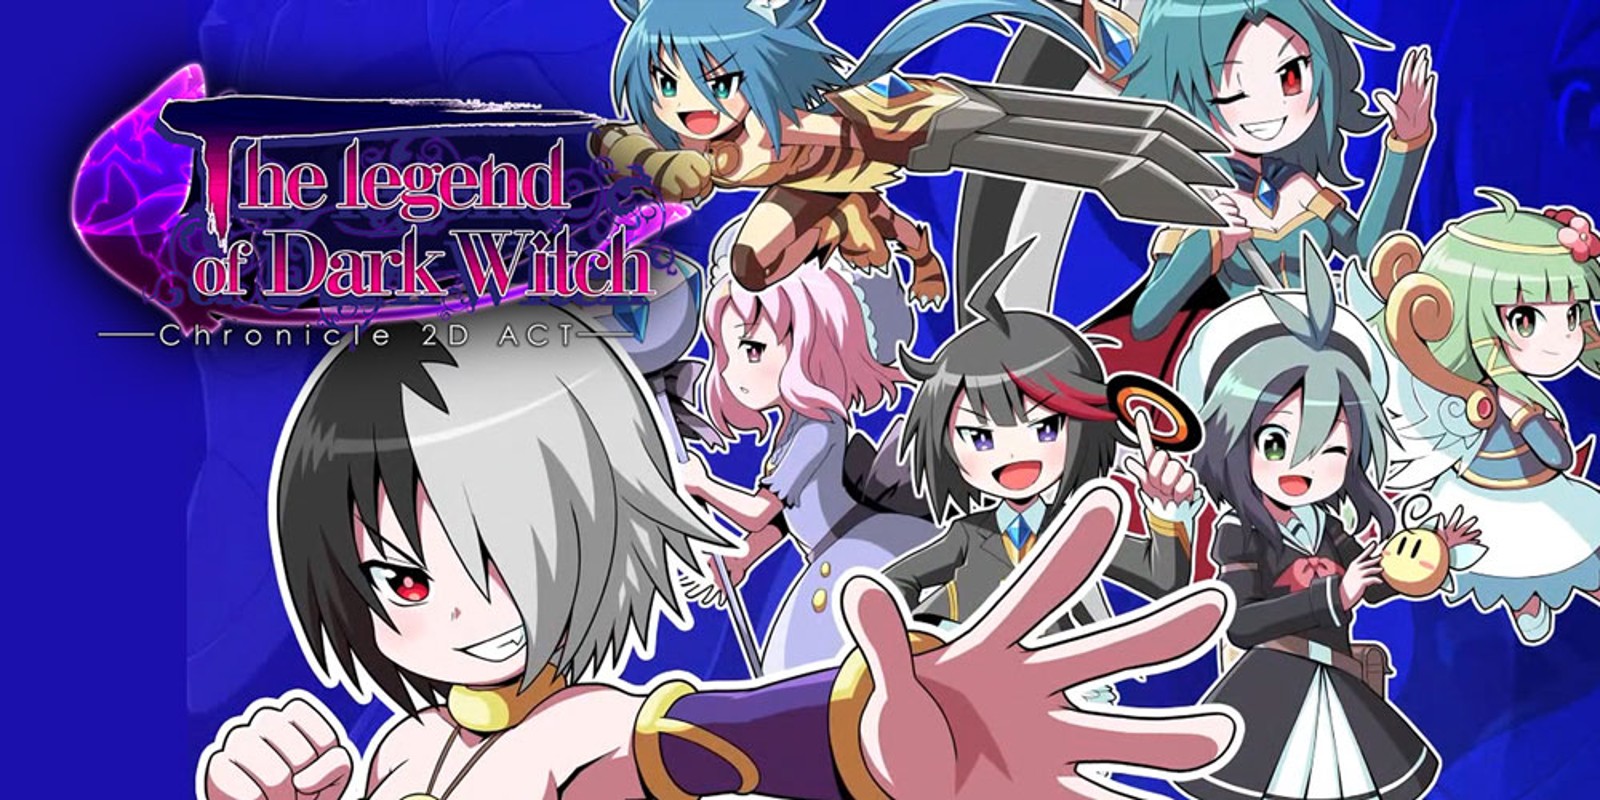 The Legend of Dark Witch - Chronicle 2D ACT